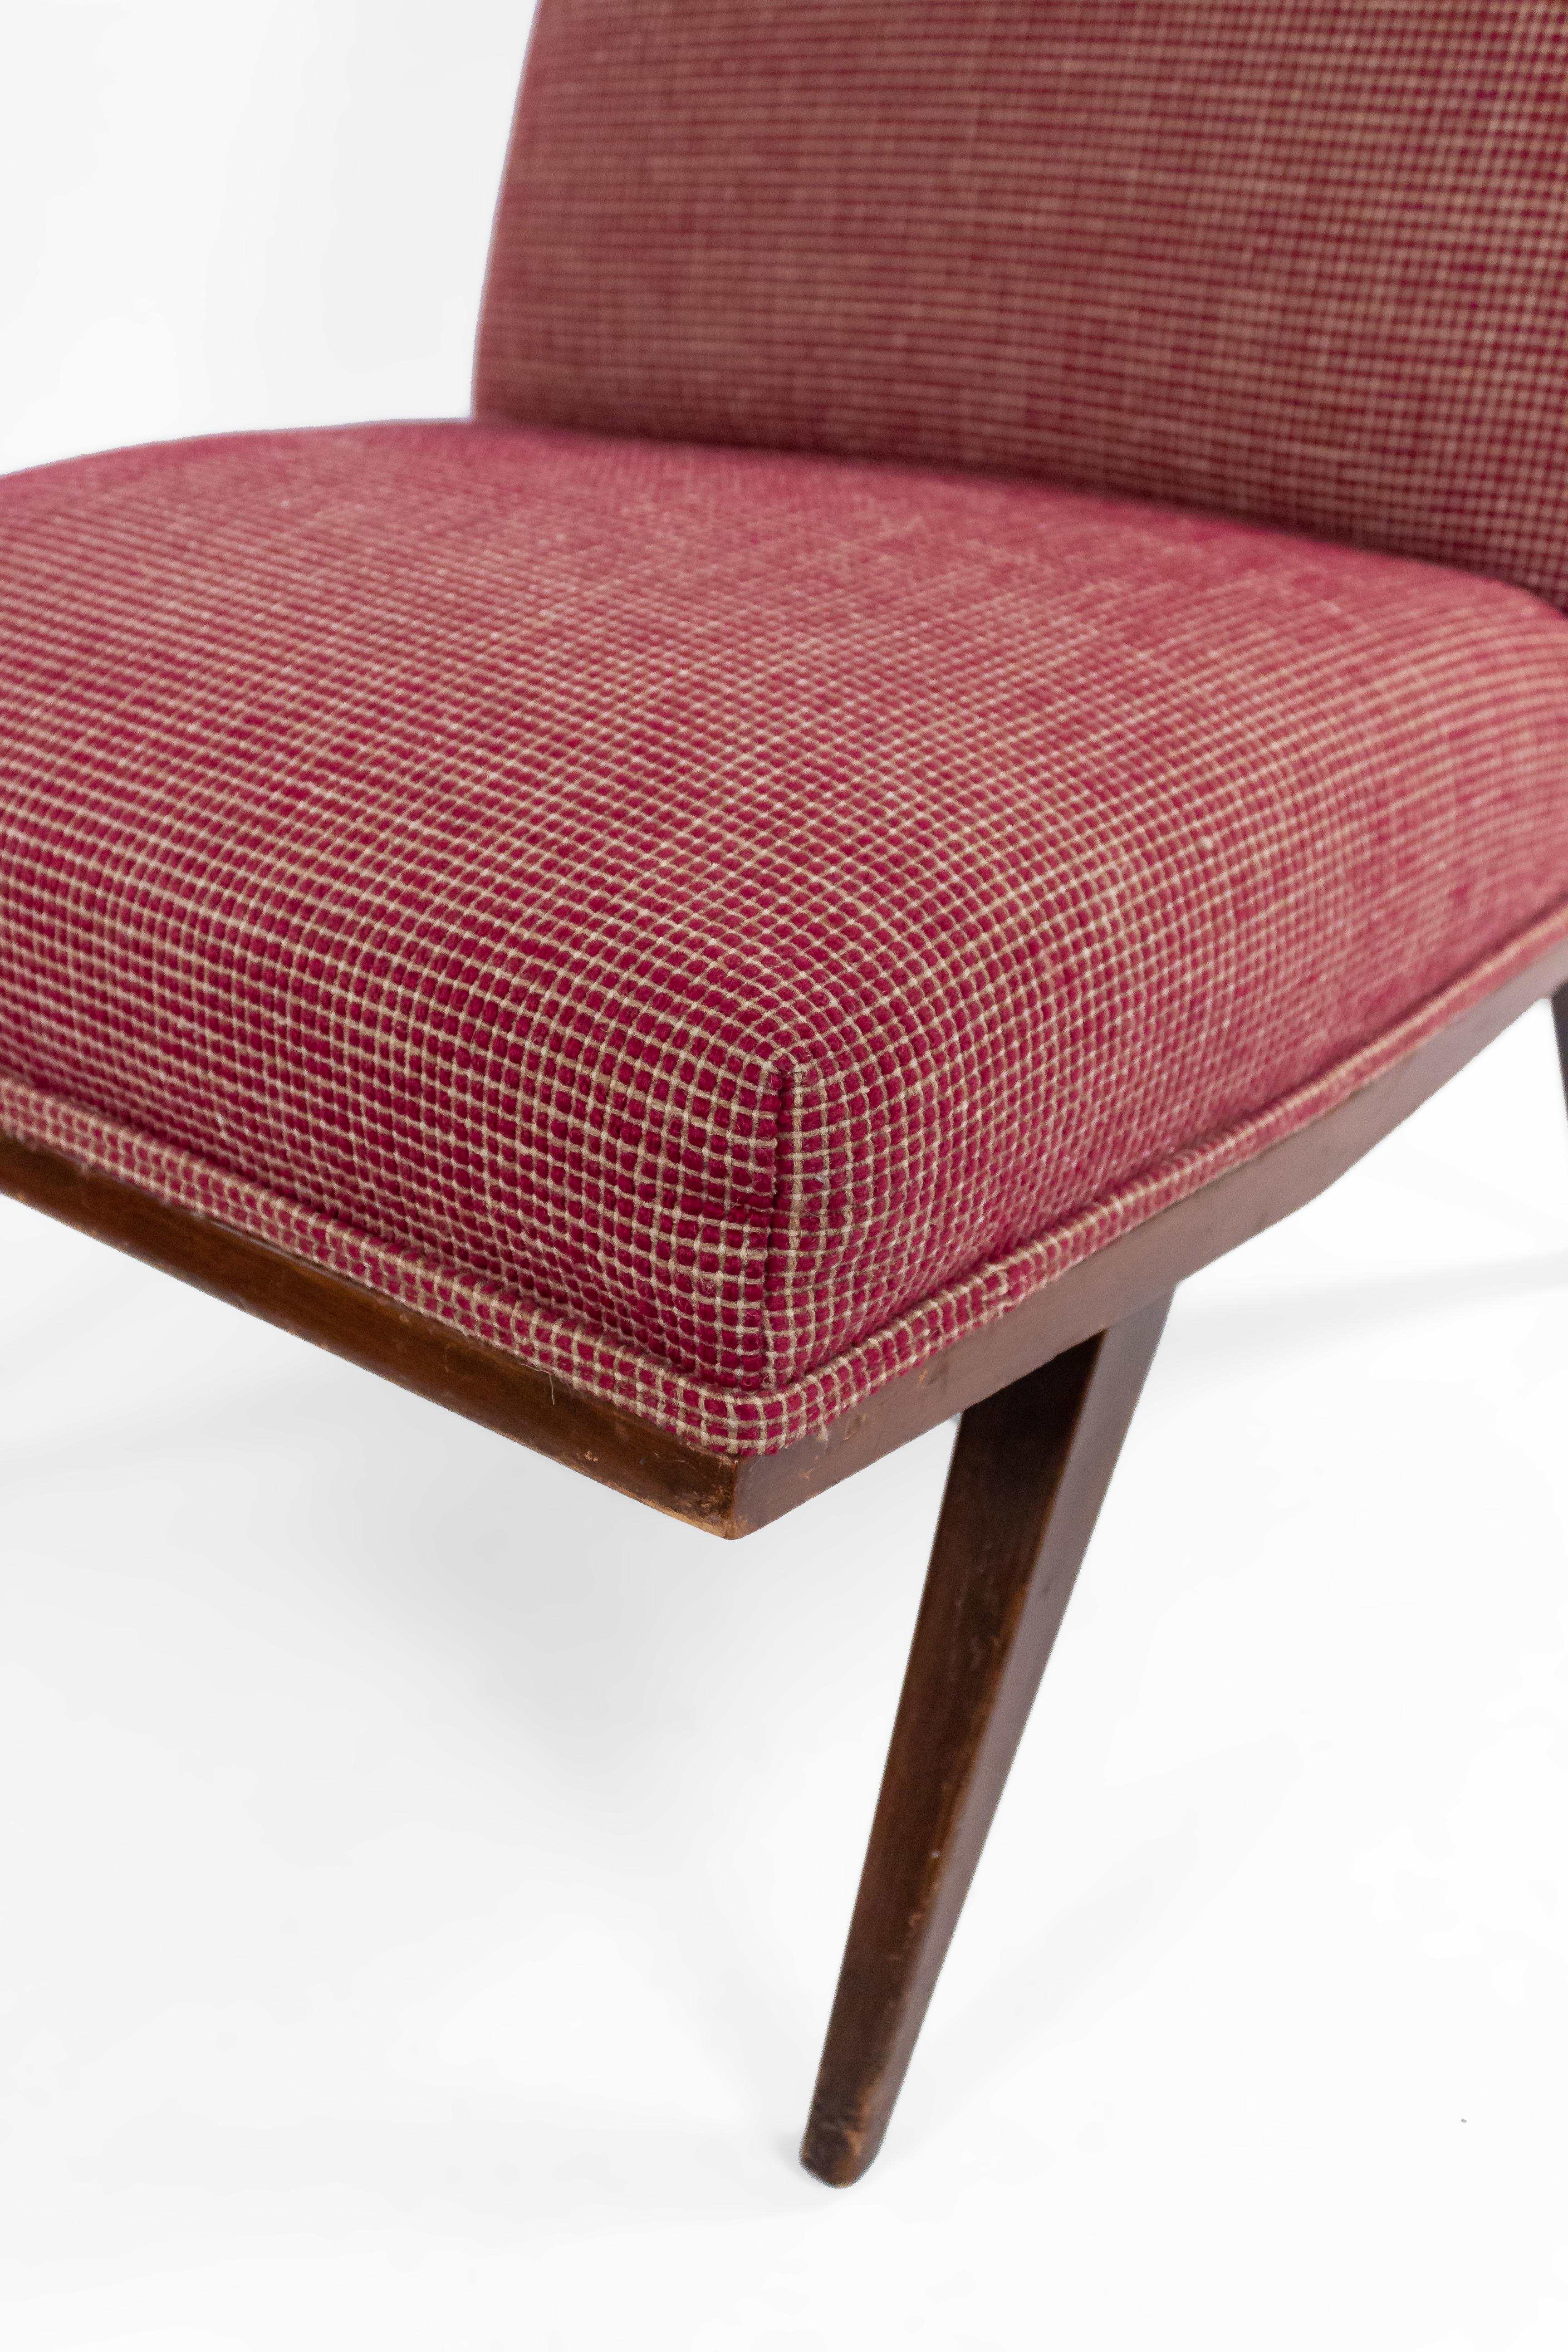 Pair of mid-century slipper chairs with red and beige geometrically patterned upholstery and tapered walnut legs.